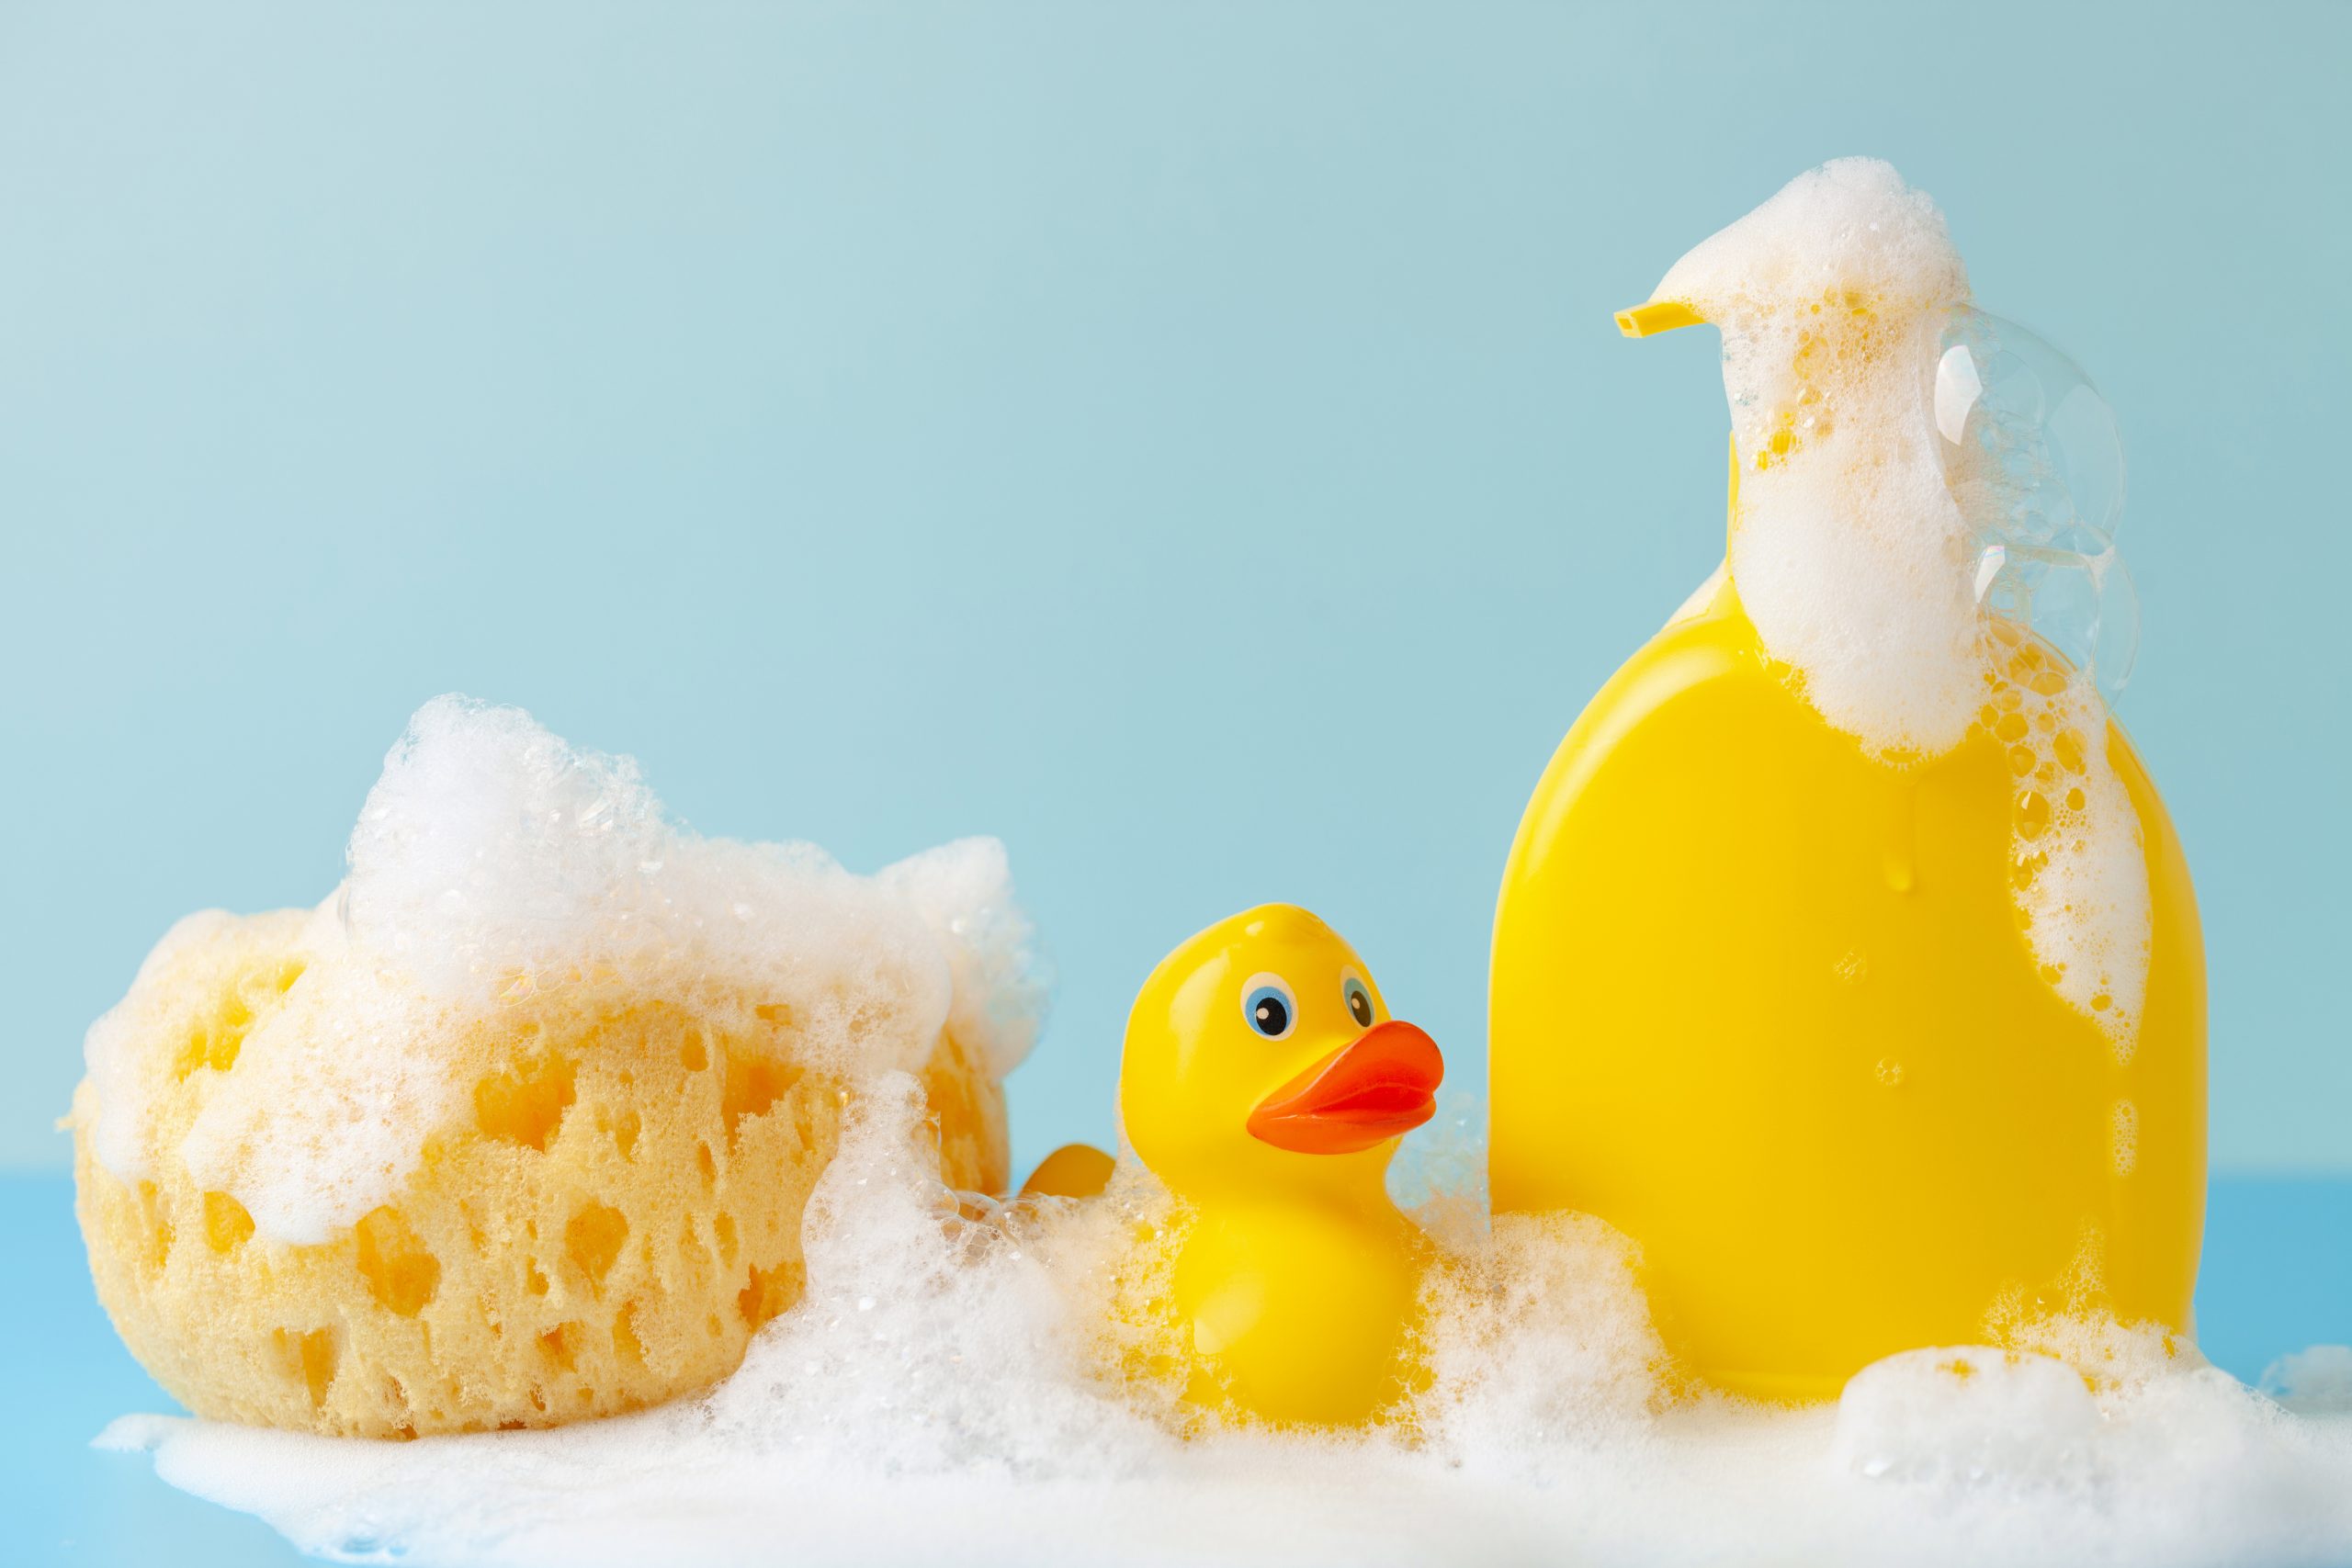 Baby shampoo on a white background, rubber yellow ducks, soap foam. Bathroom accessories